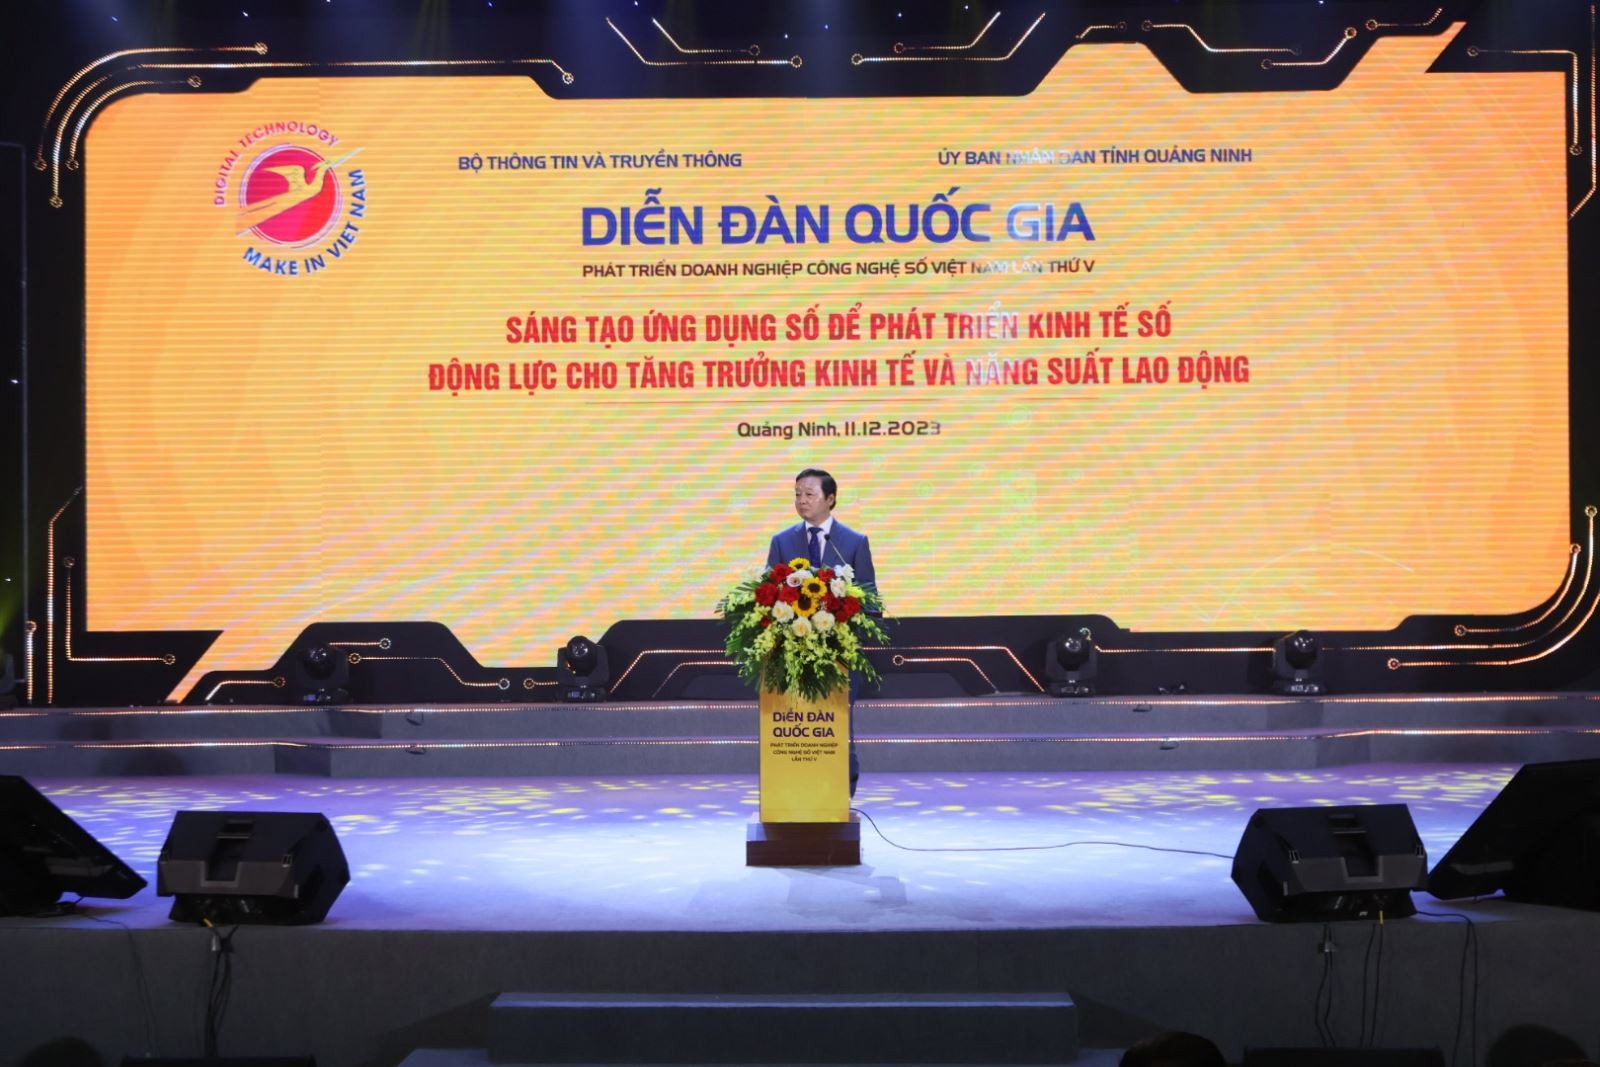 dien-dan-quoc-gia-phat-trien-doanh-nghiep-cong-nghe-so-pho-cap-cong-nghe-so-vao-cuoc-song-02-1702278756.jpeg